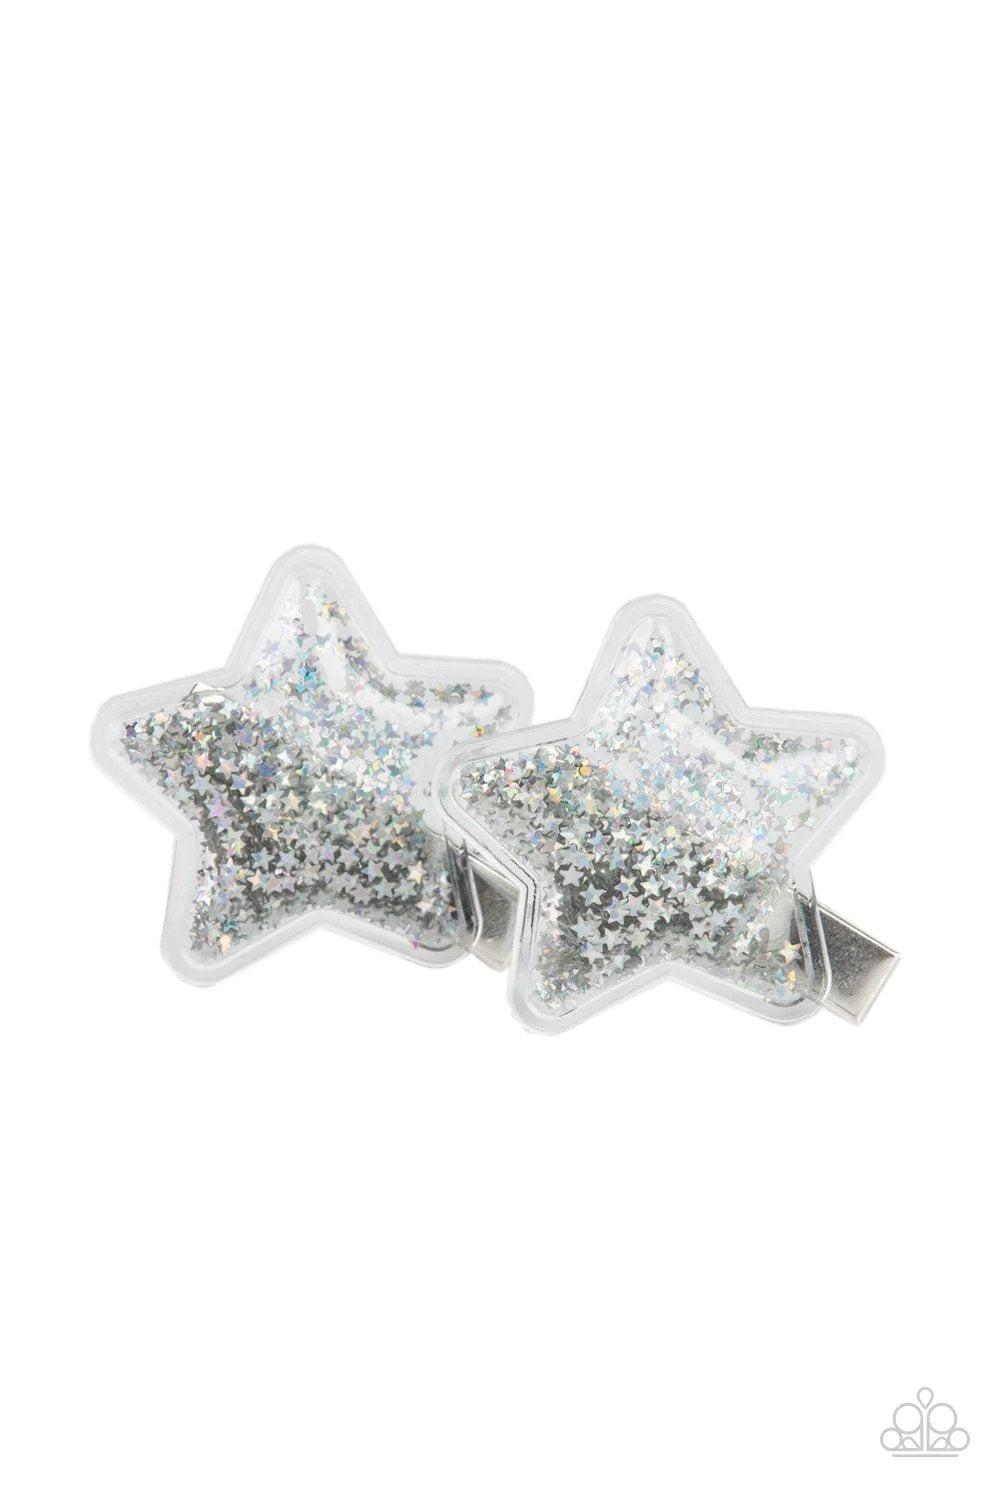 Stellar-ista Silver Star Hair Clip - Paparazzi Accessories- on model - CarasShop.com - $5 Jewelry by Cara Jewels